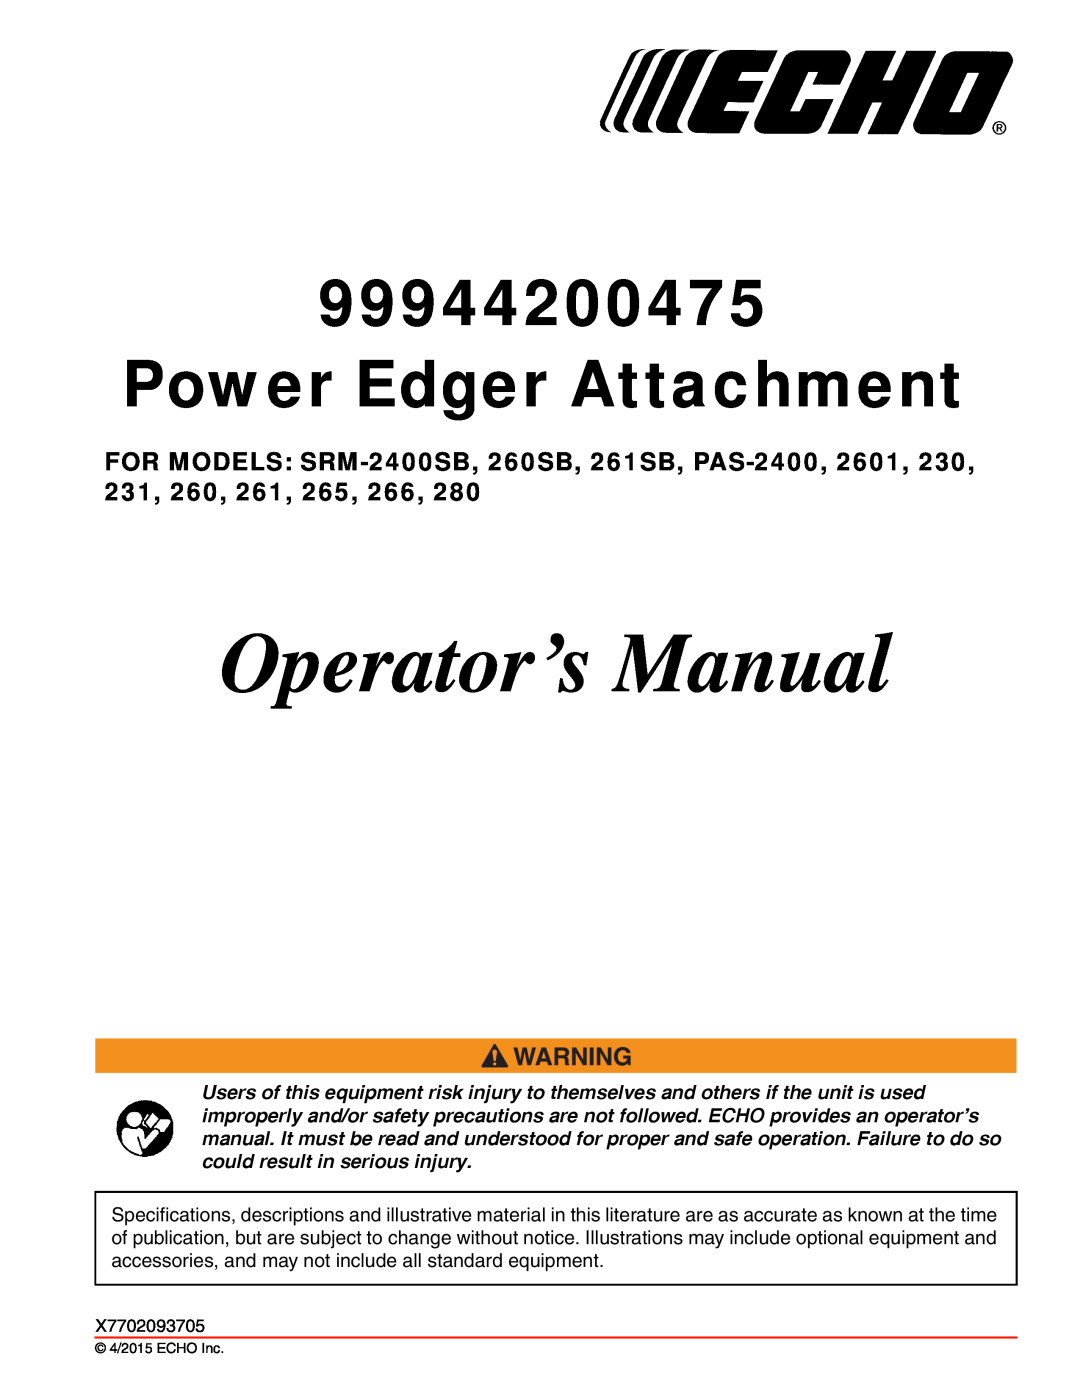 Echo 99944200475 specifications Operator’s Manual, Power Edger Attachment 